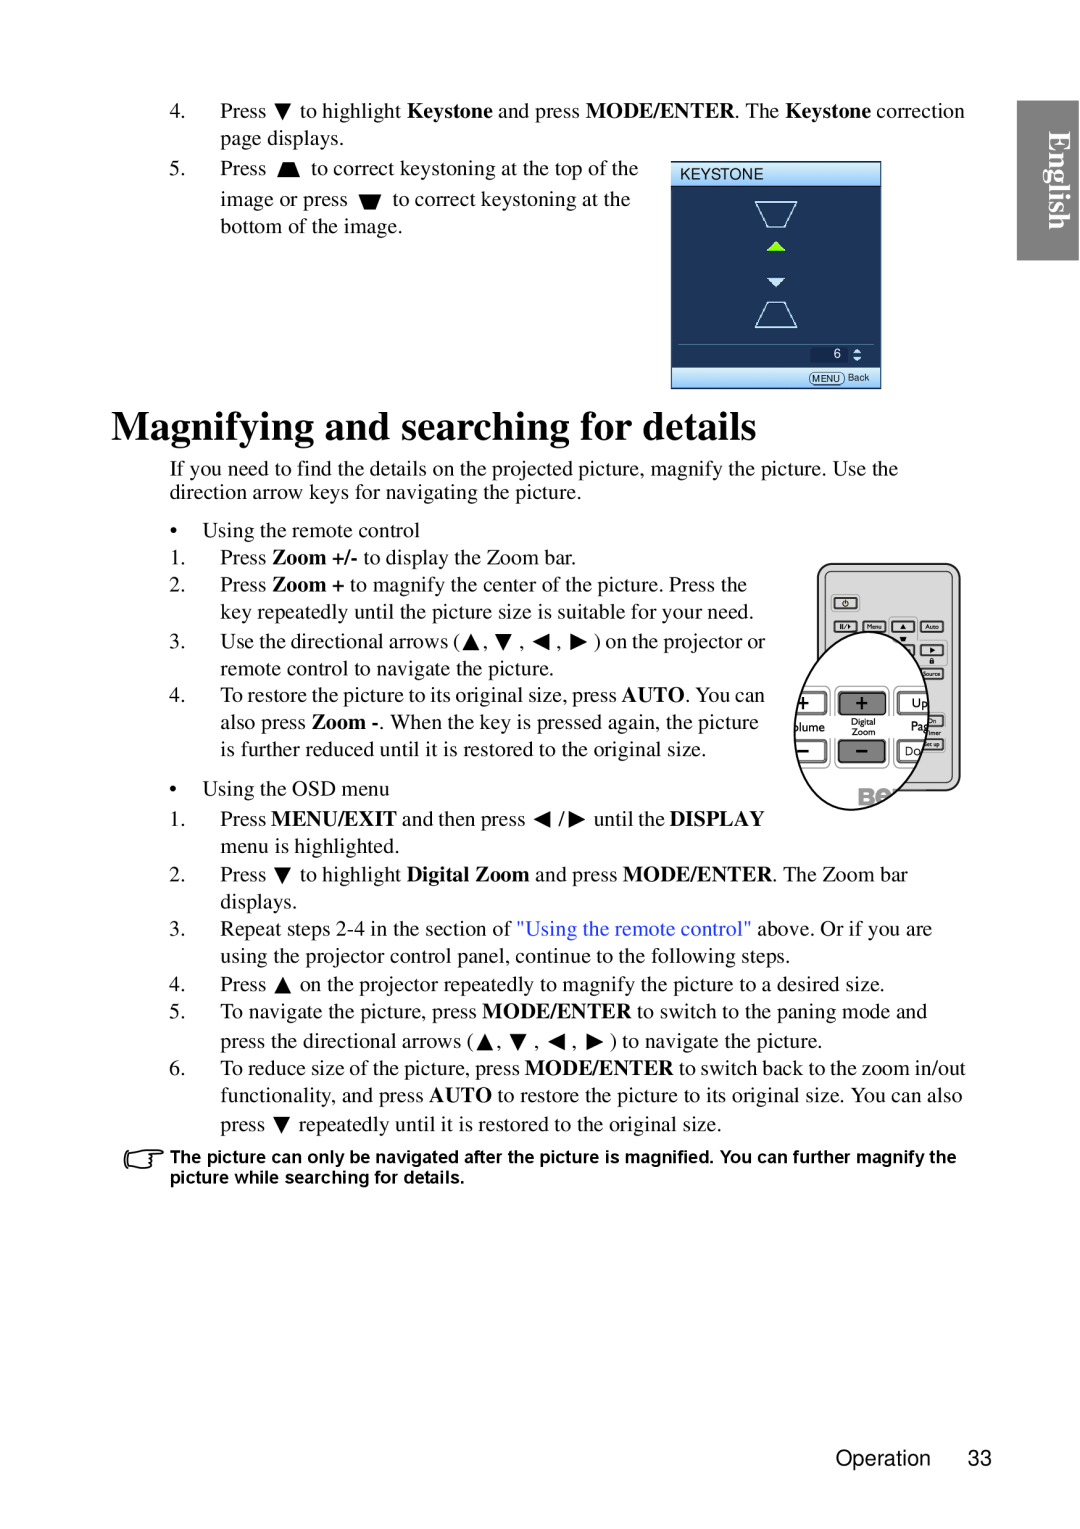 BenQ MP670 user manual Magnifying and searching for details, Keystone 